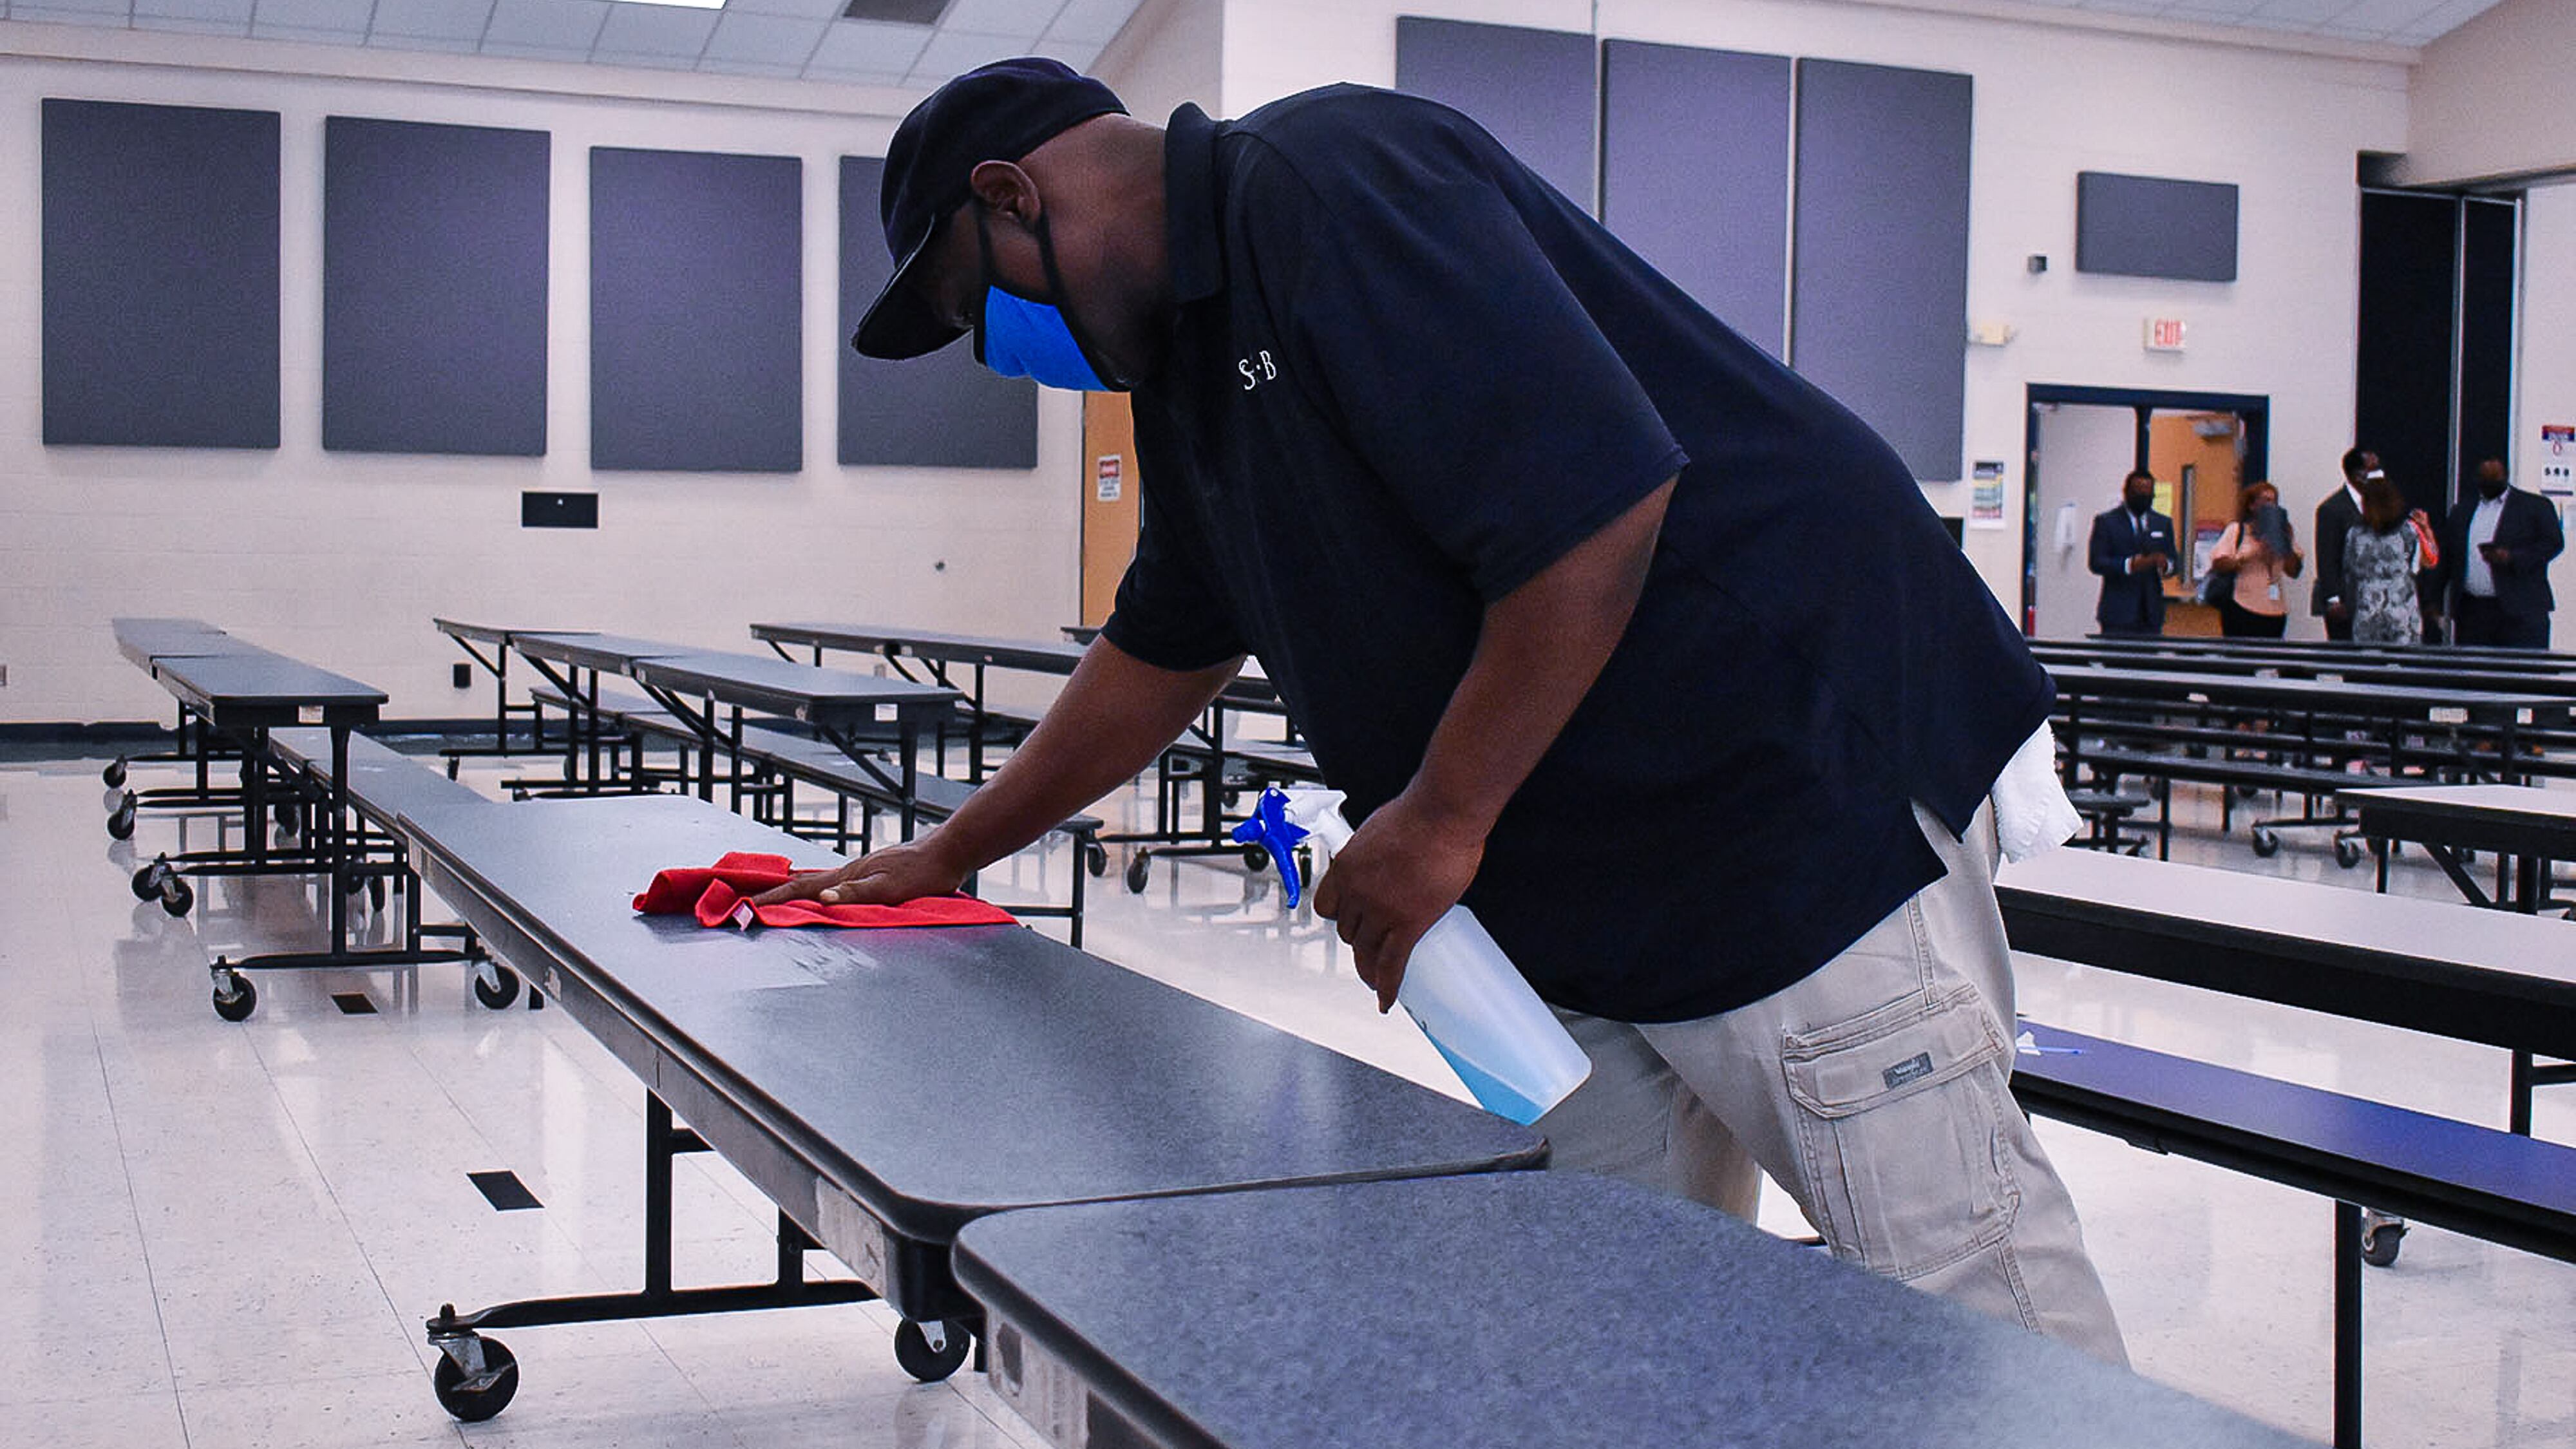 A Shelby County Schools employee sanitizes one of many long cafeteria tables while a group of people stand toward the back of the room.